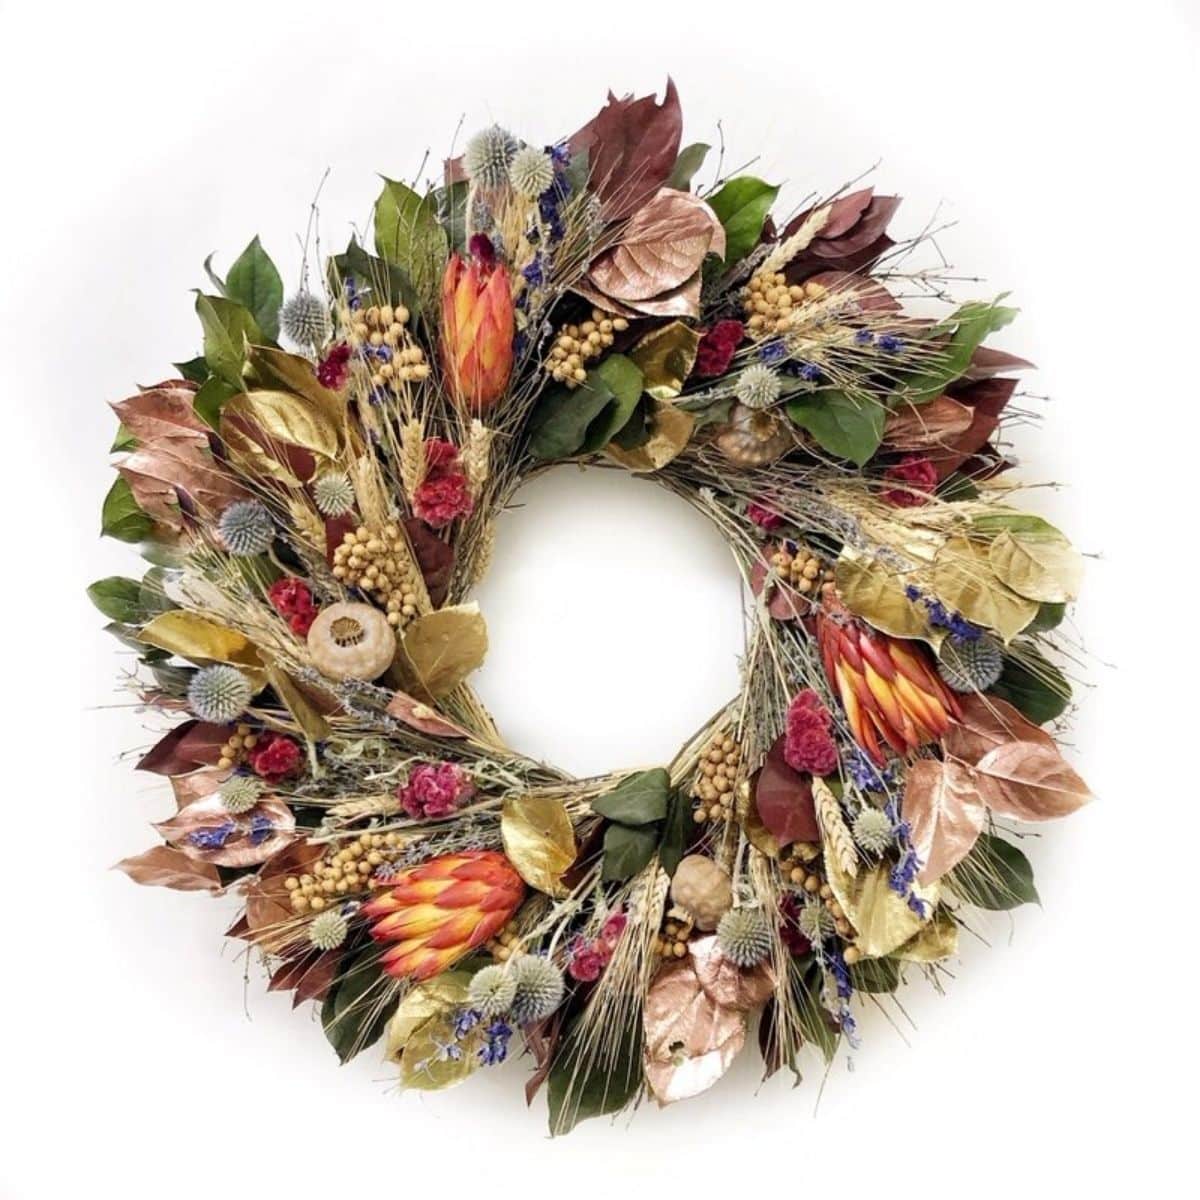 Wreath made of salal leaves, burgundy, copper, and natural basil from wayfair.